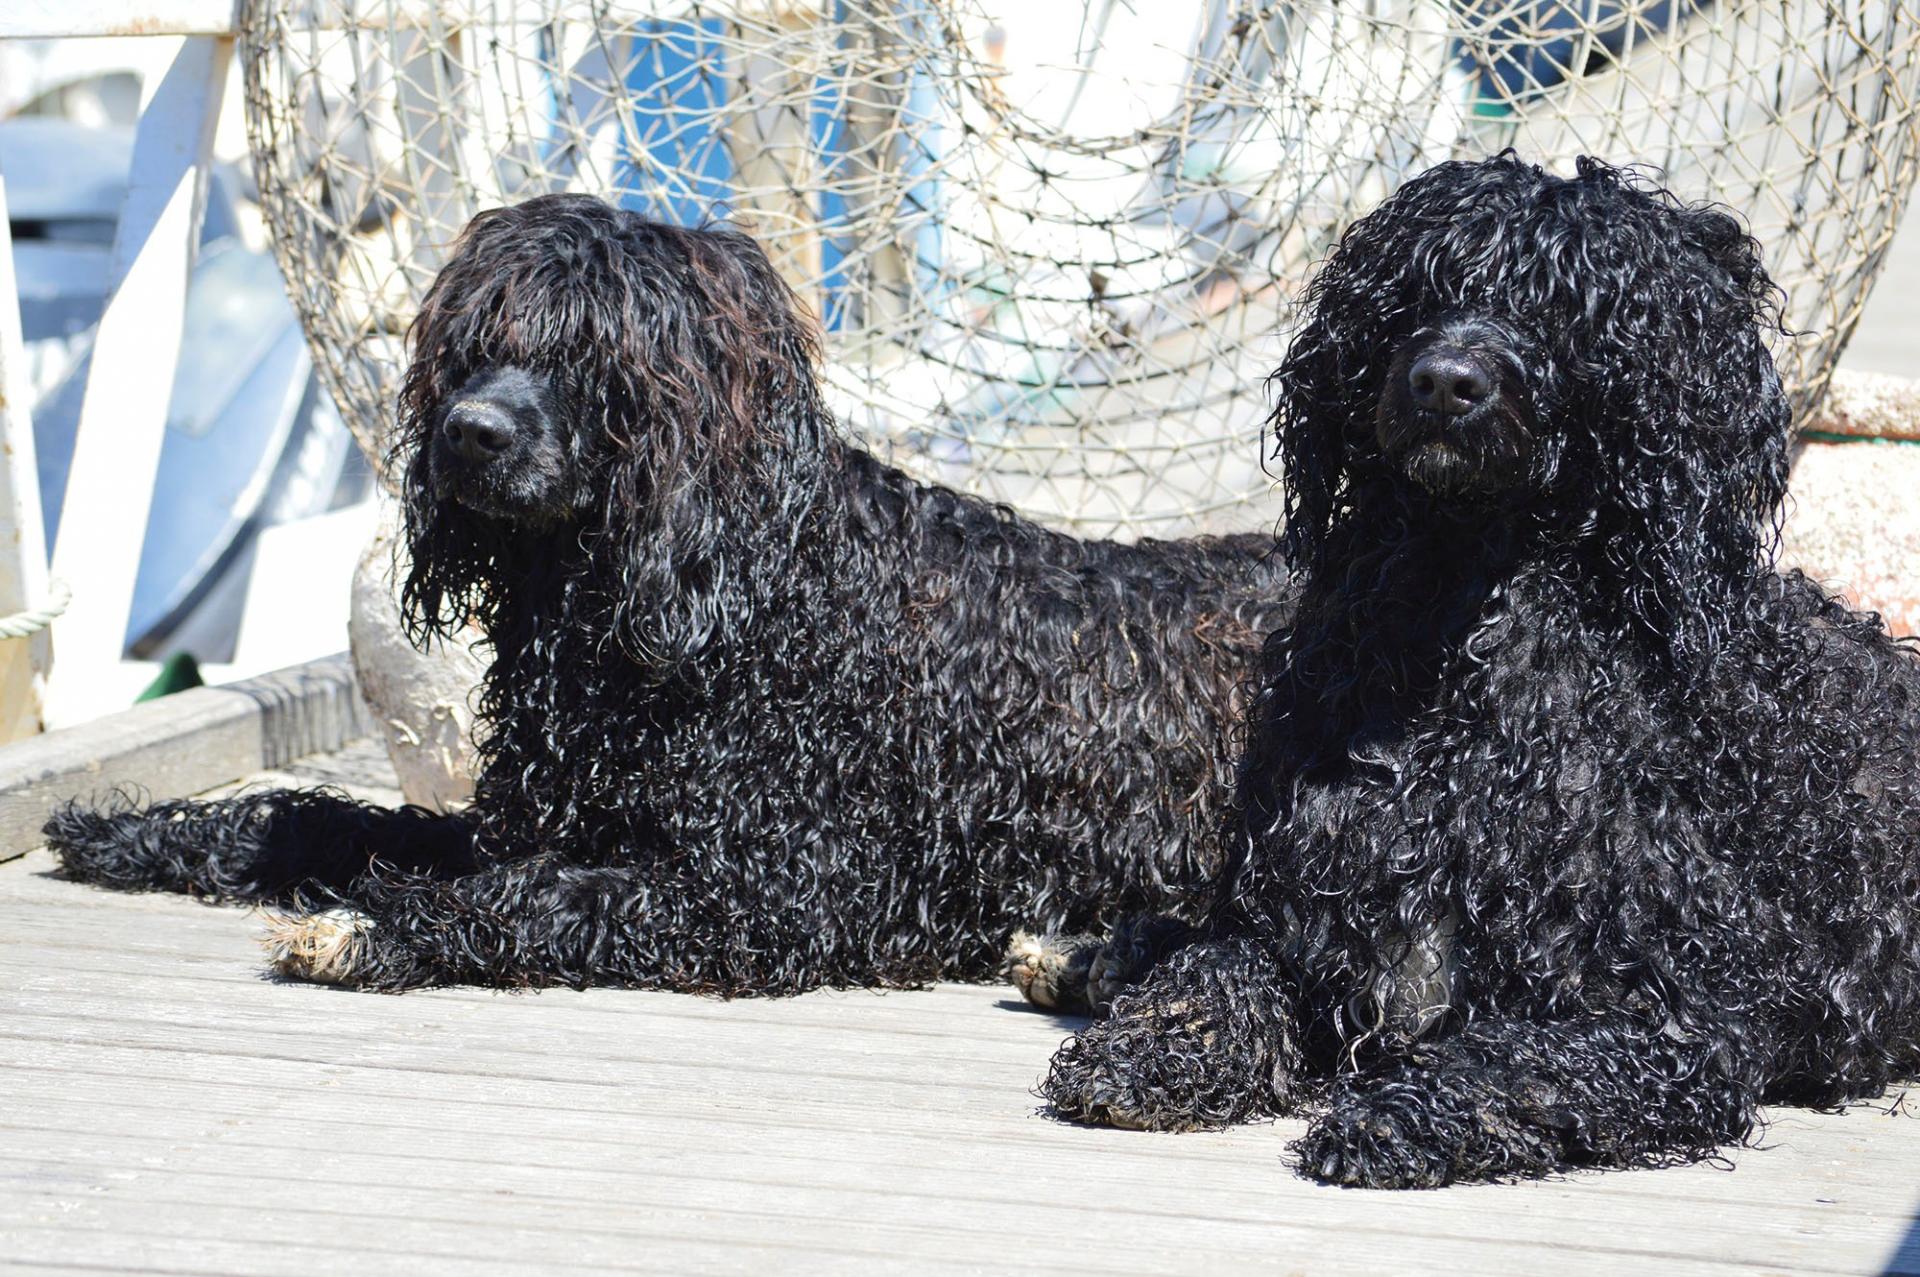 The breed of Portuguese water dog